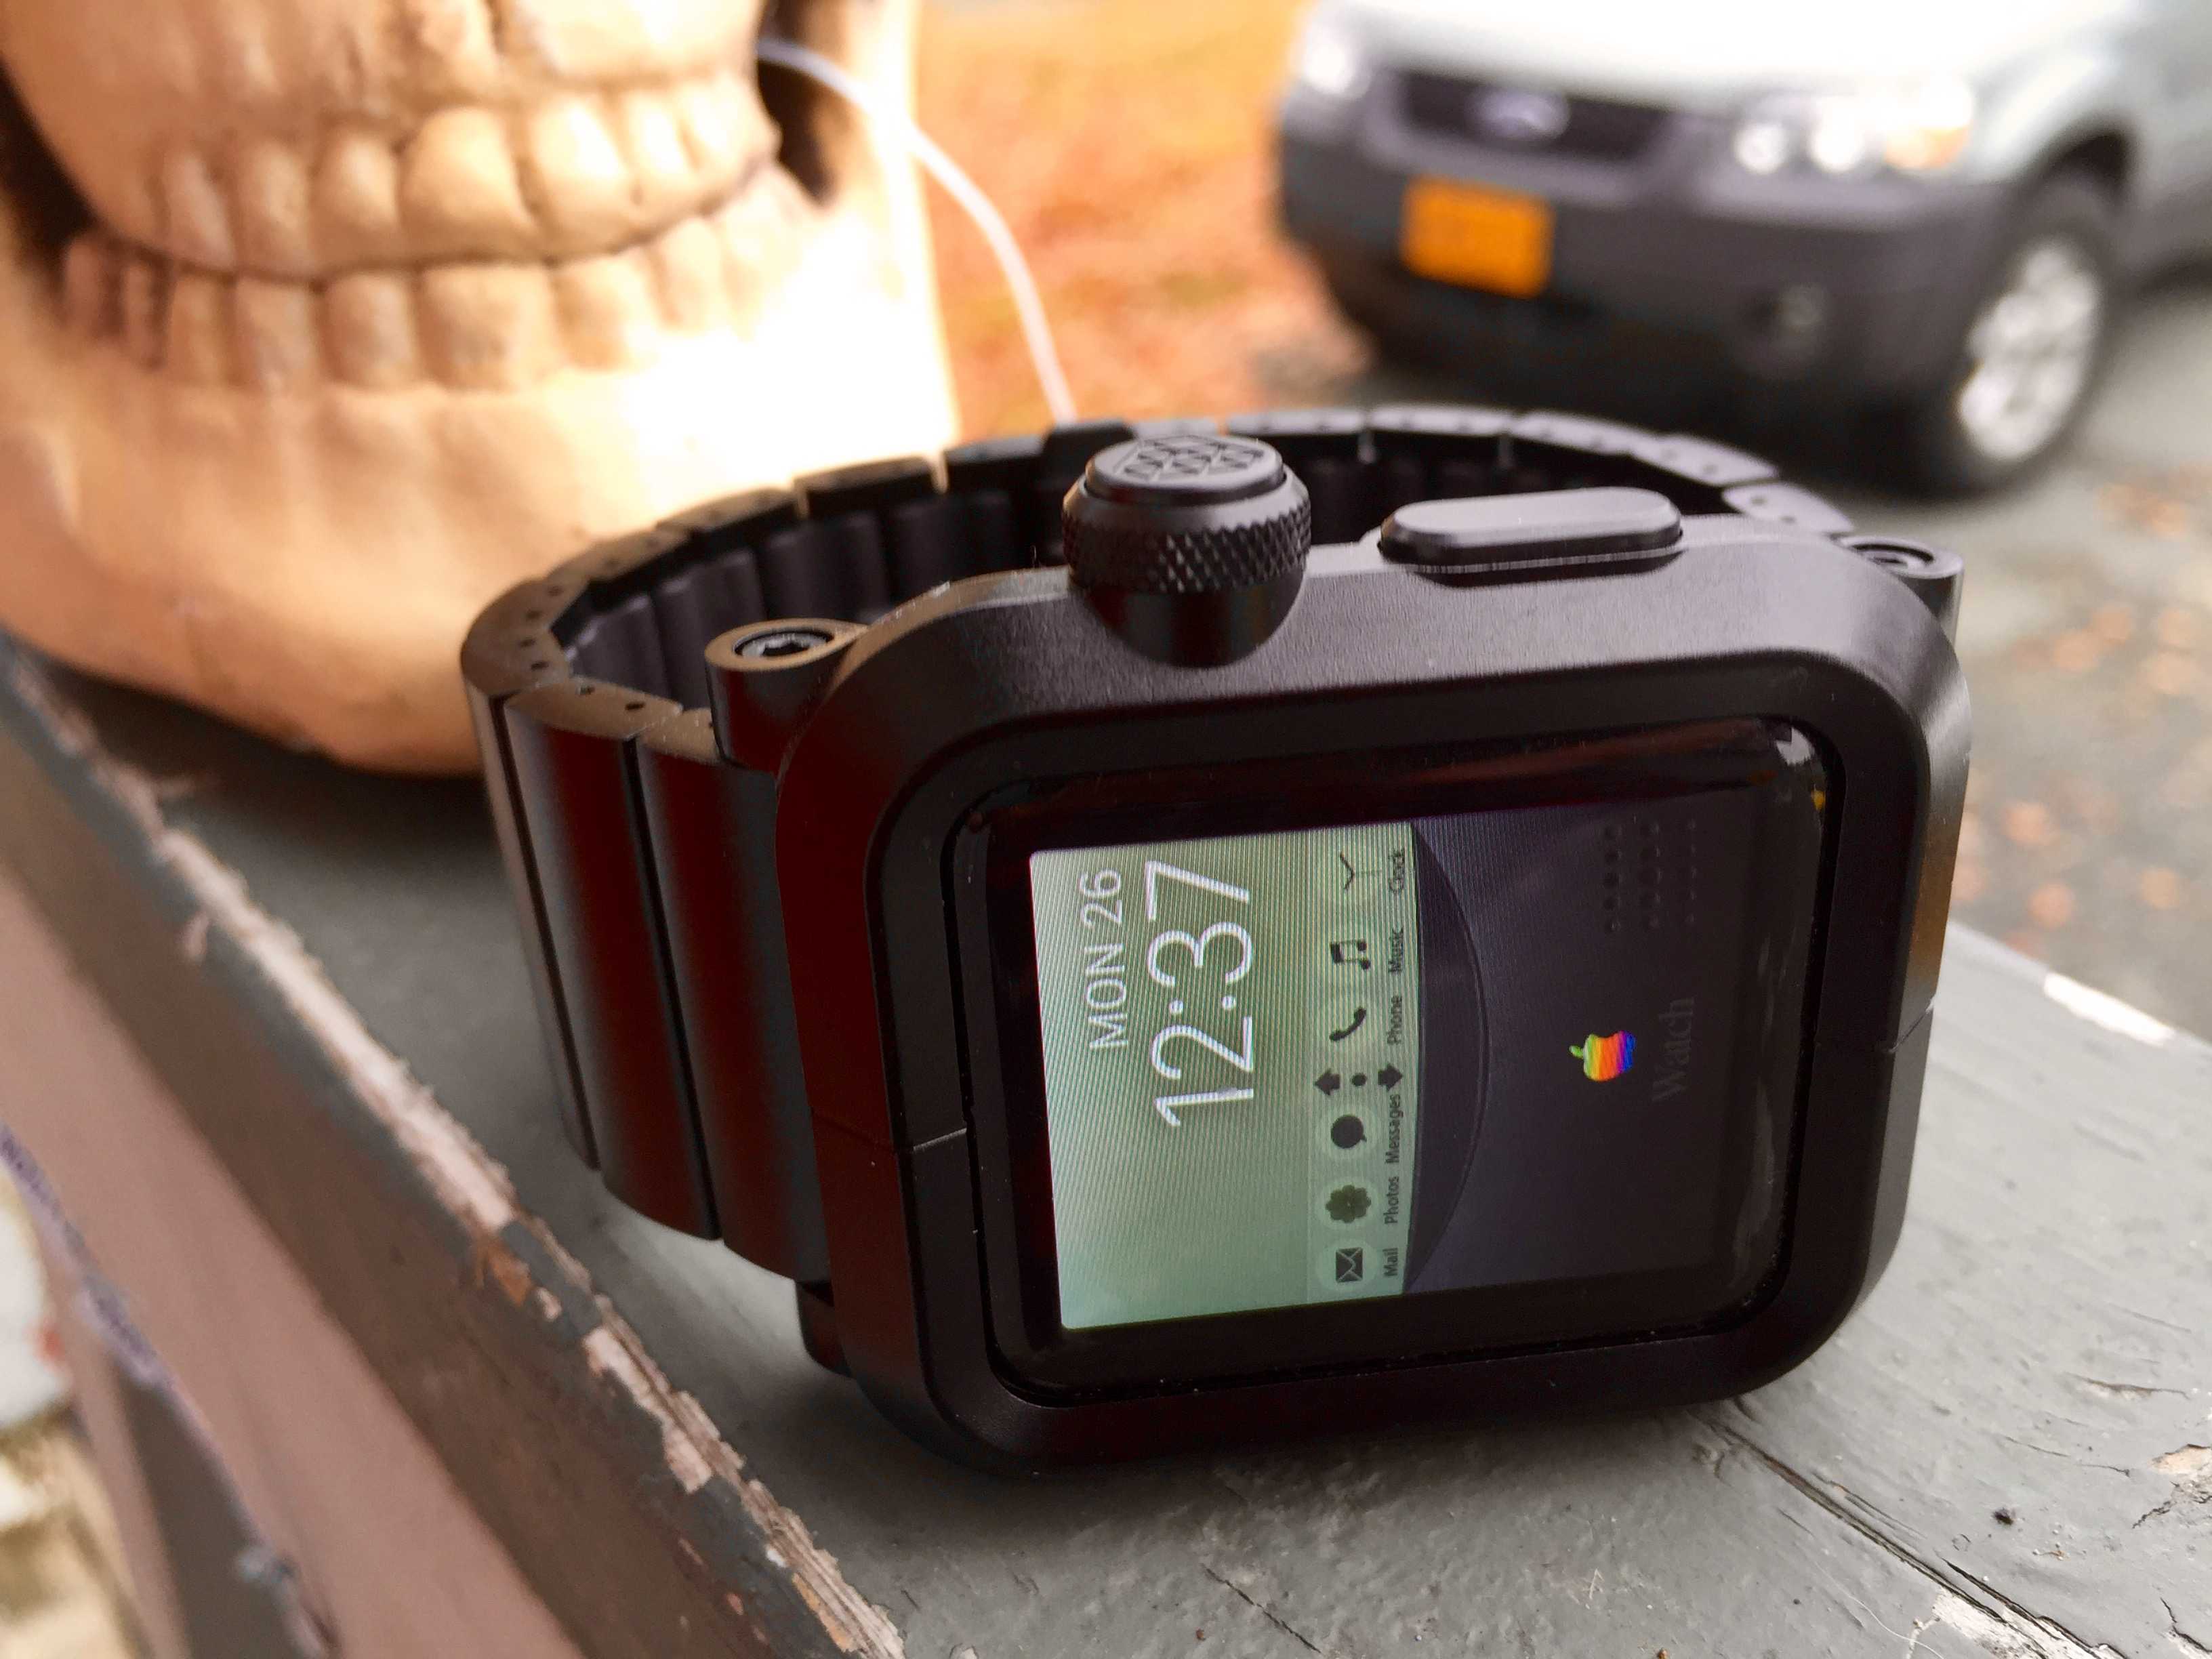 Put your Apple Watch inside an Epik case and it'll be protected (and super-sized.)